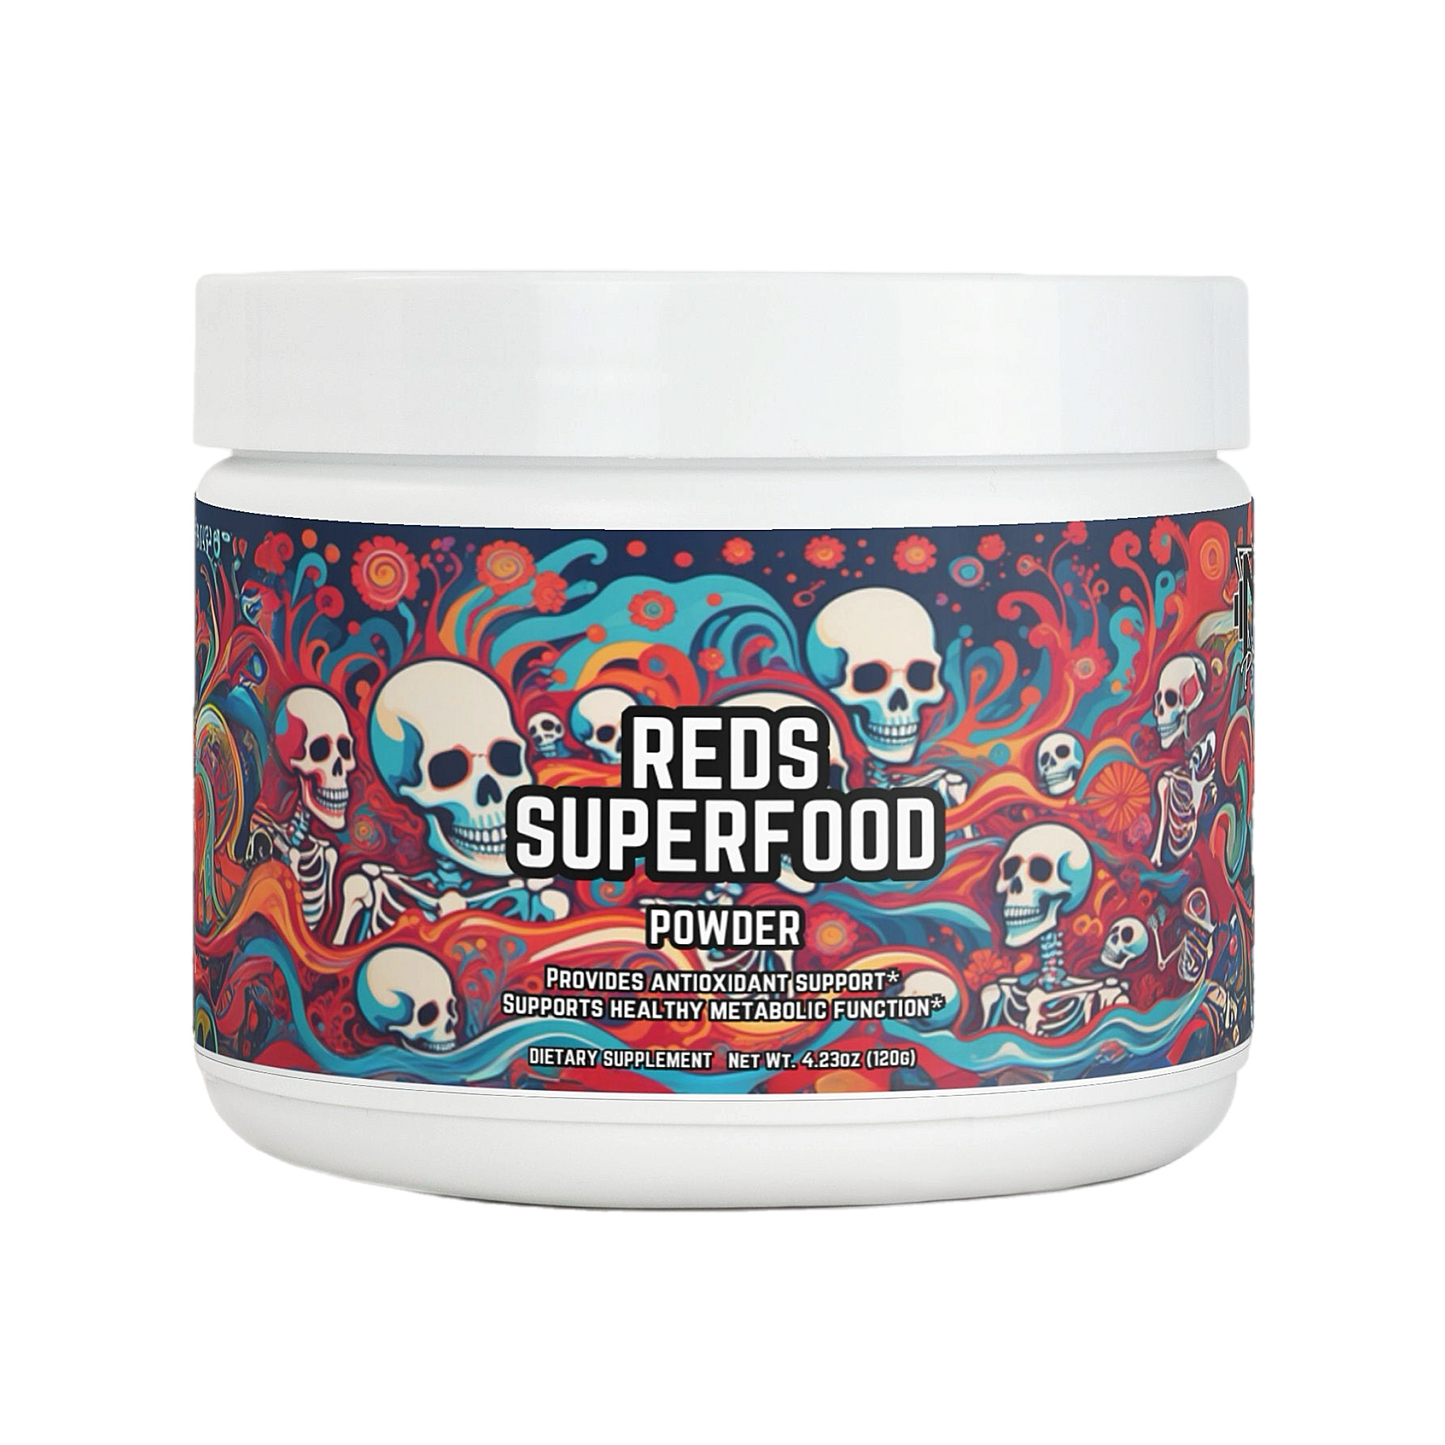 Reds Superfood by Project M